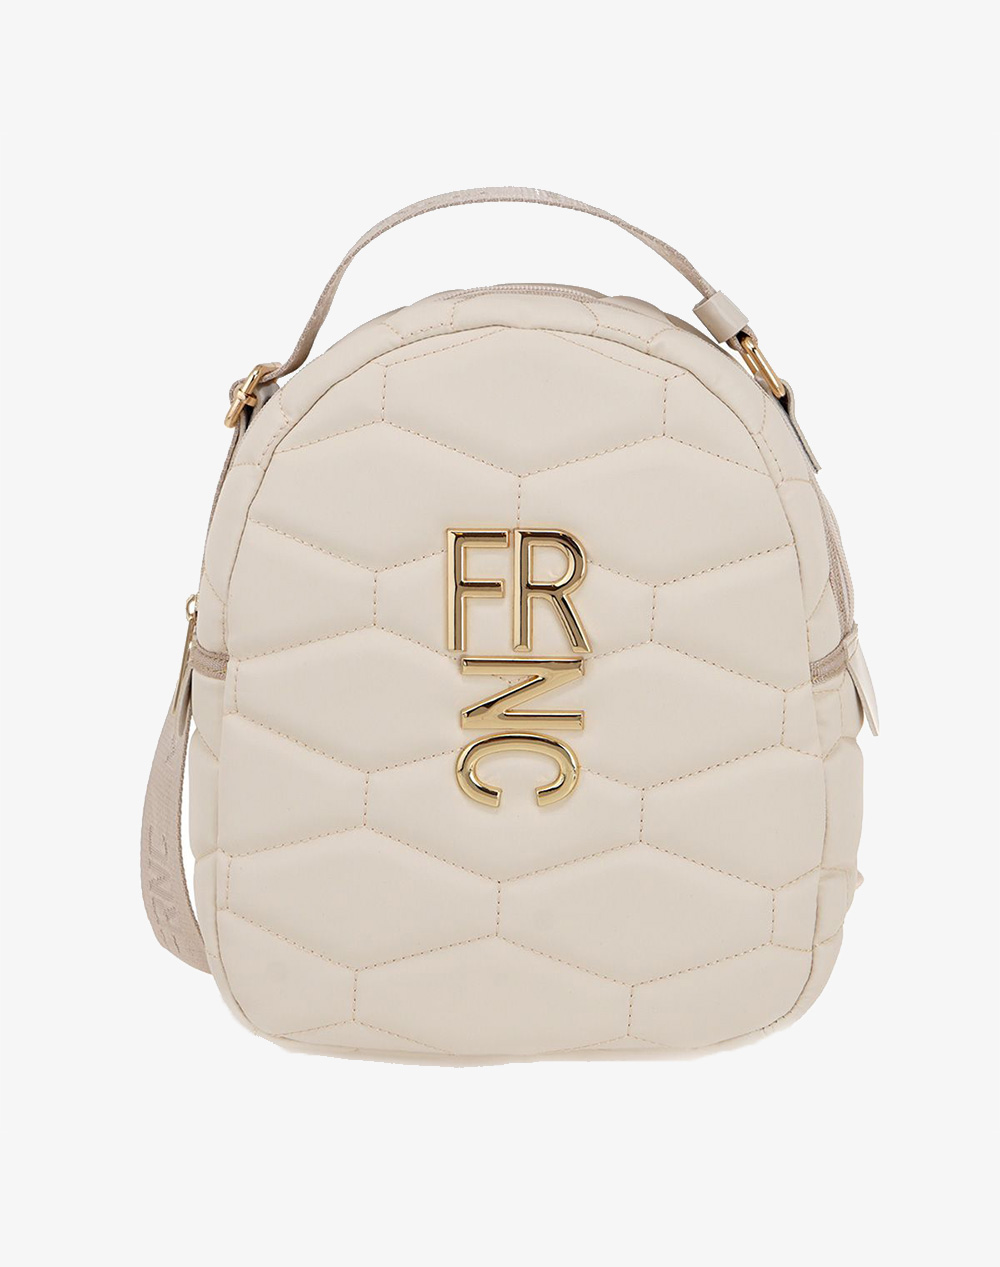 FRNC BACKPACK (Διαστάσεις: 24 x 28 x 11 εκ) S618R907907S-07S Ivory 3810PT-FC6220016_90132